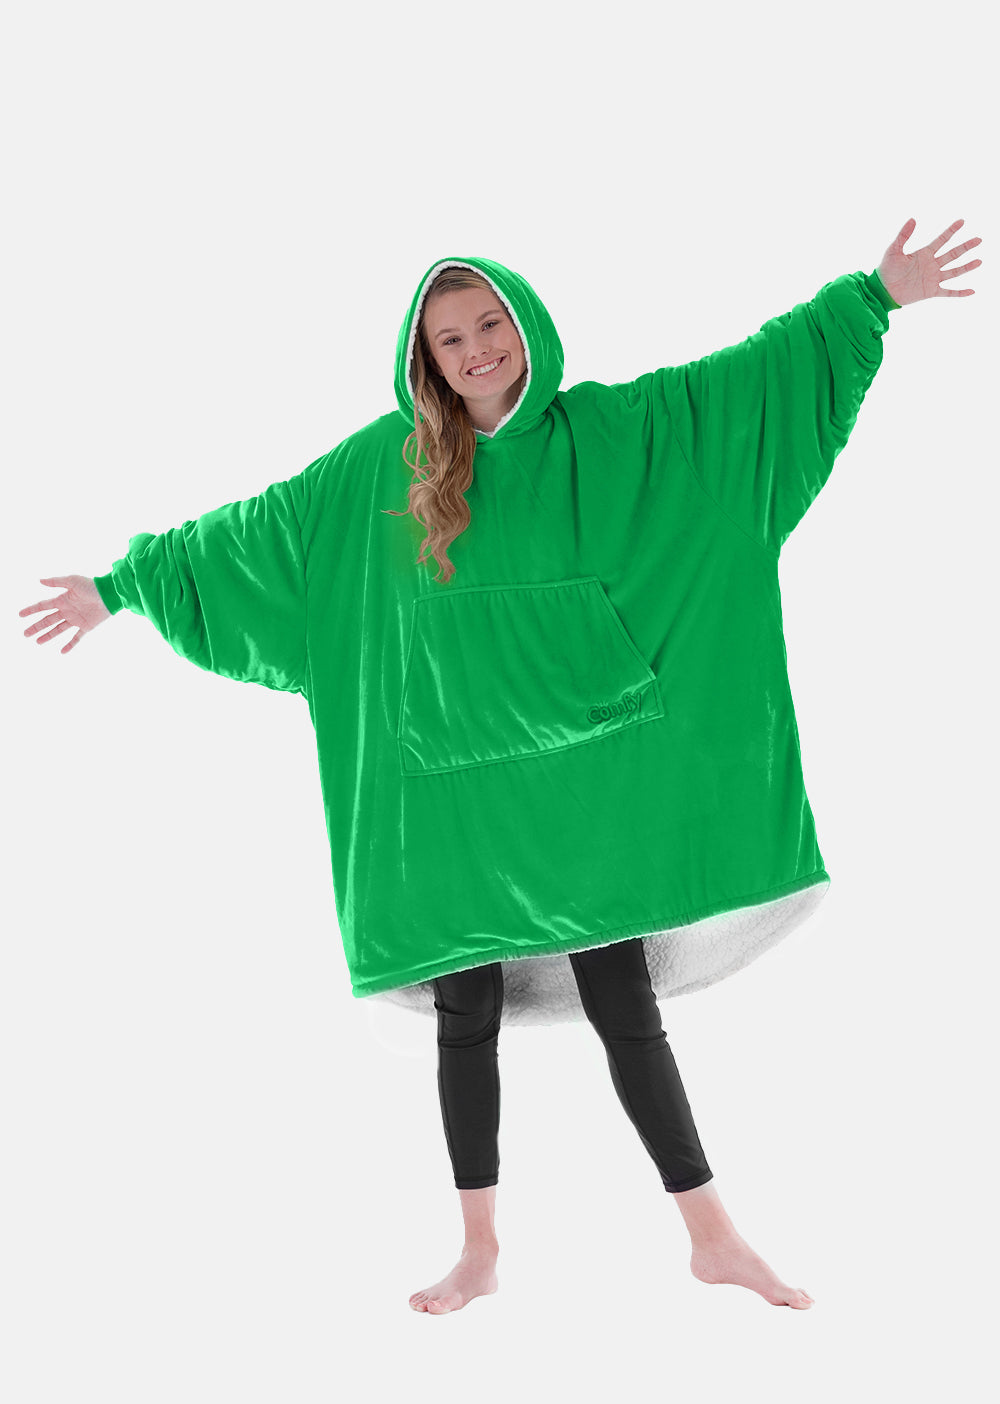 The Comfy Review 2018 - A Blanket-Hoodie for People Who Are Always